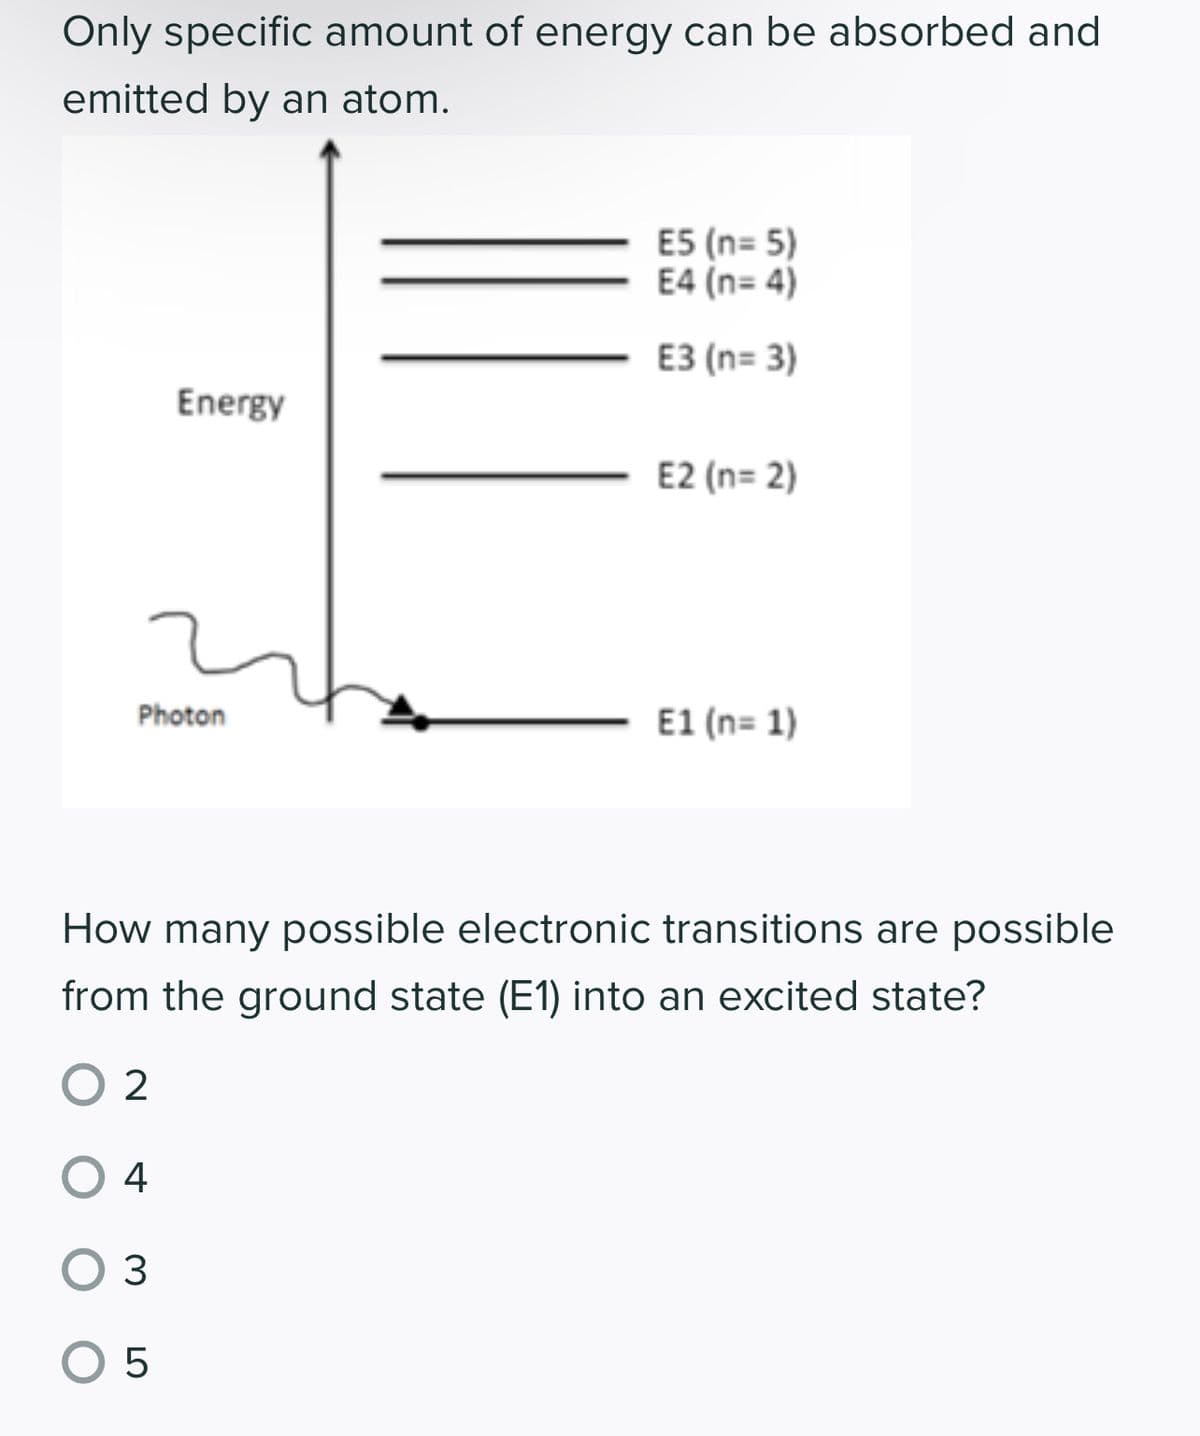 Only specific amount of energy can be absorbed and
emitted by an atom.
Energy
Photon
E5 (n=5)
E4 (n=4)
E3 (n= 3)
E2 (n=2)
E1 (n=1)
How many possible electronic transitions are possible
from the ground state (E1) into an excited state?
02
O 4
O 3
0 5